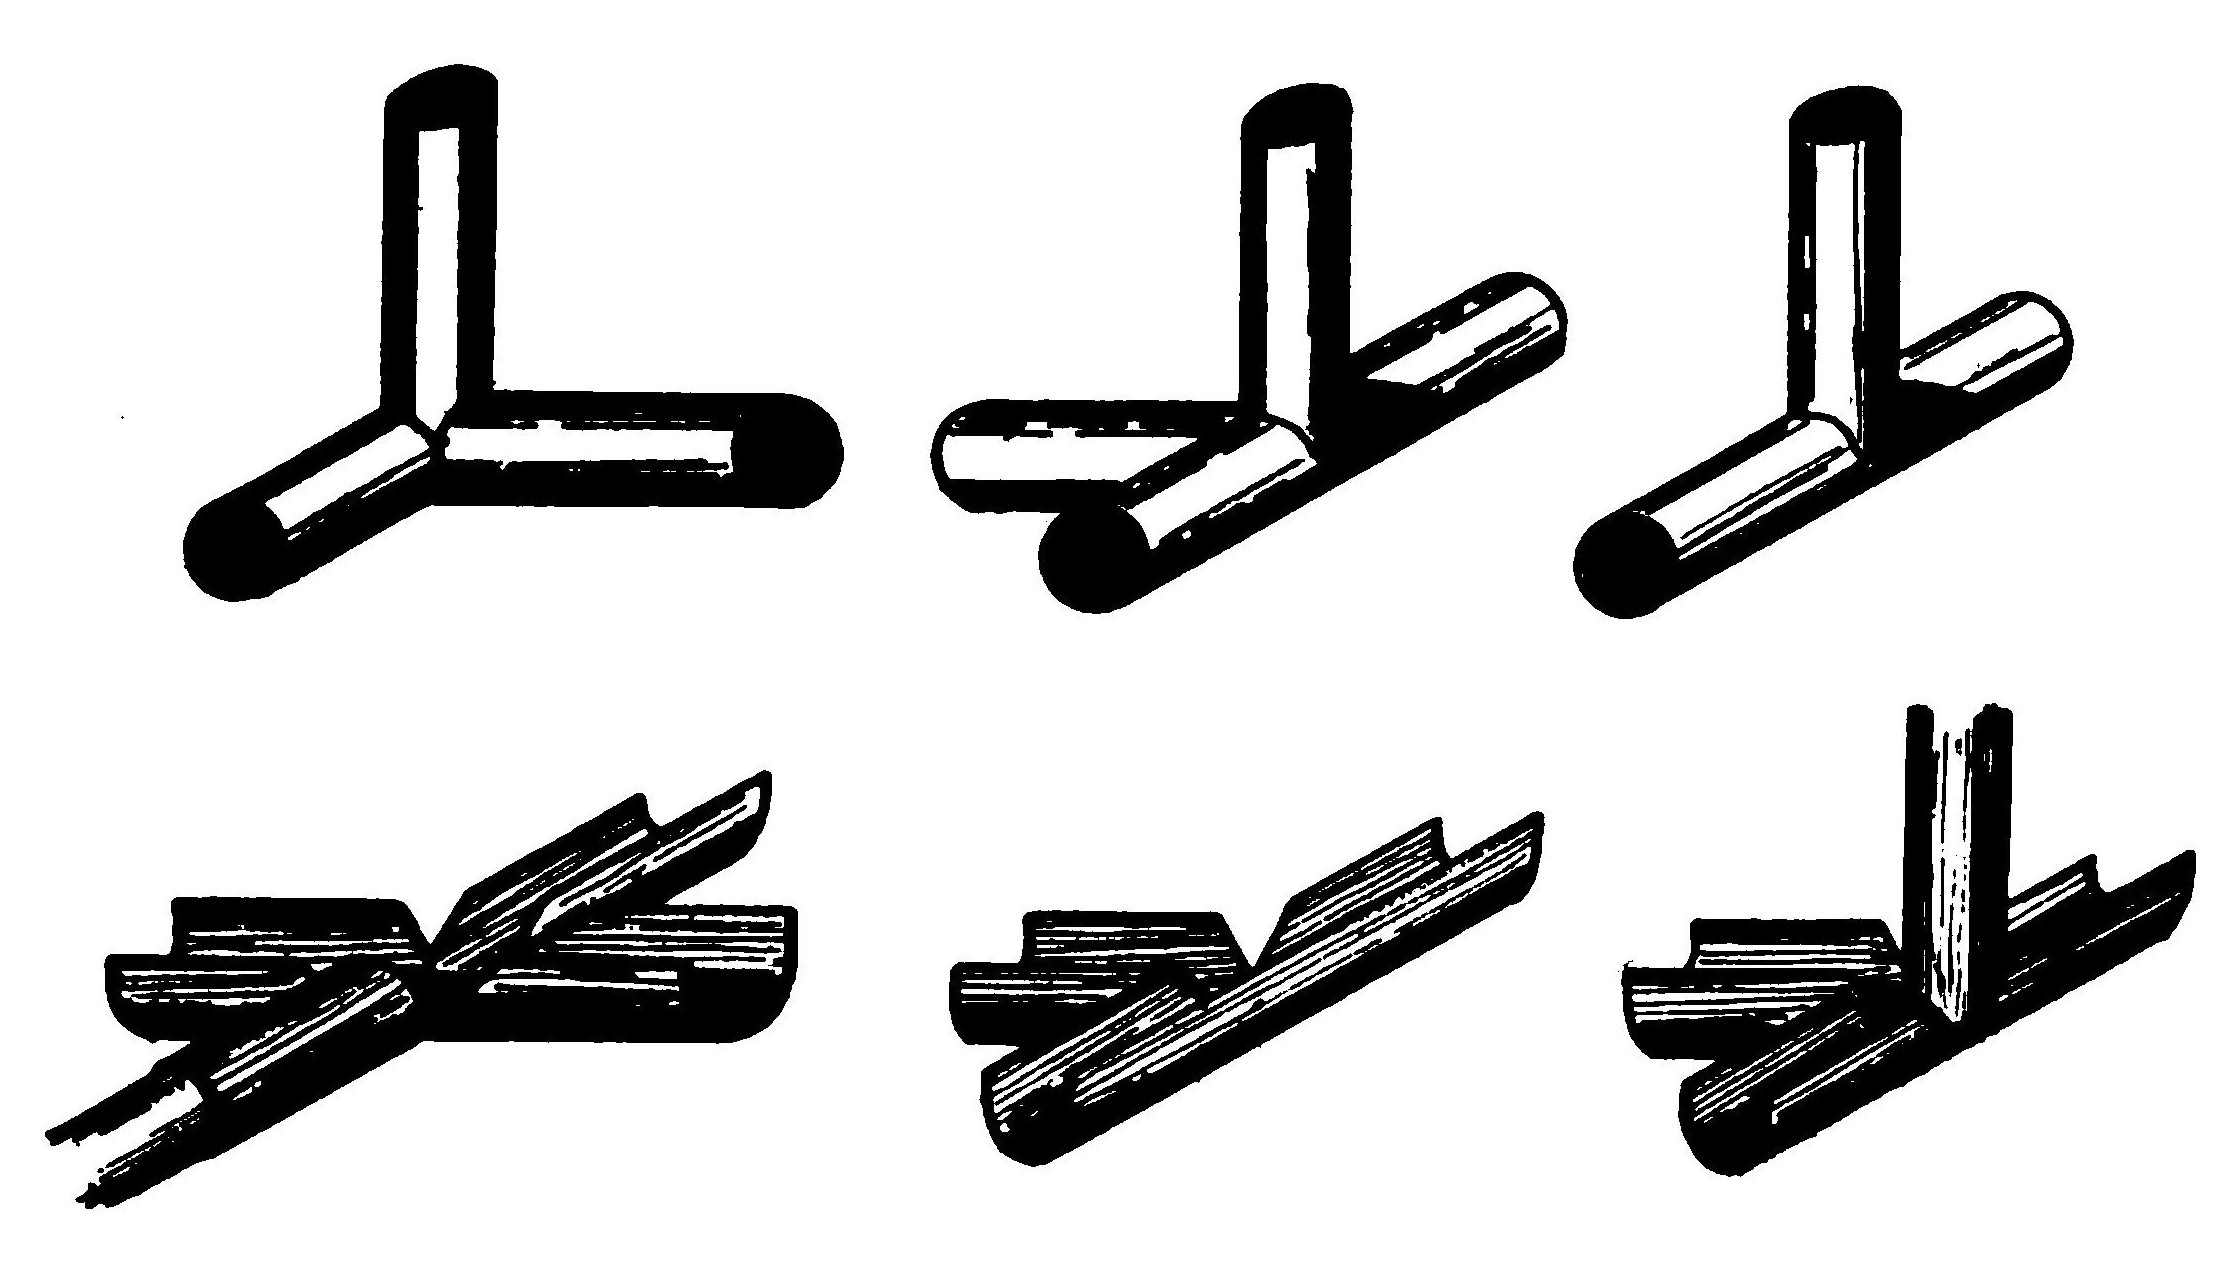 FIG. 34. Method of forming sockets for joining struts, etc., by cutting from sheet metal.